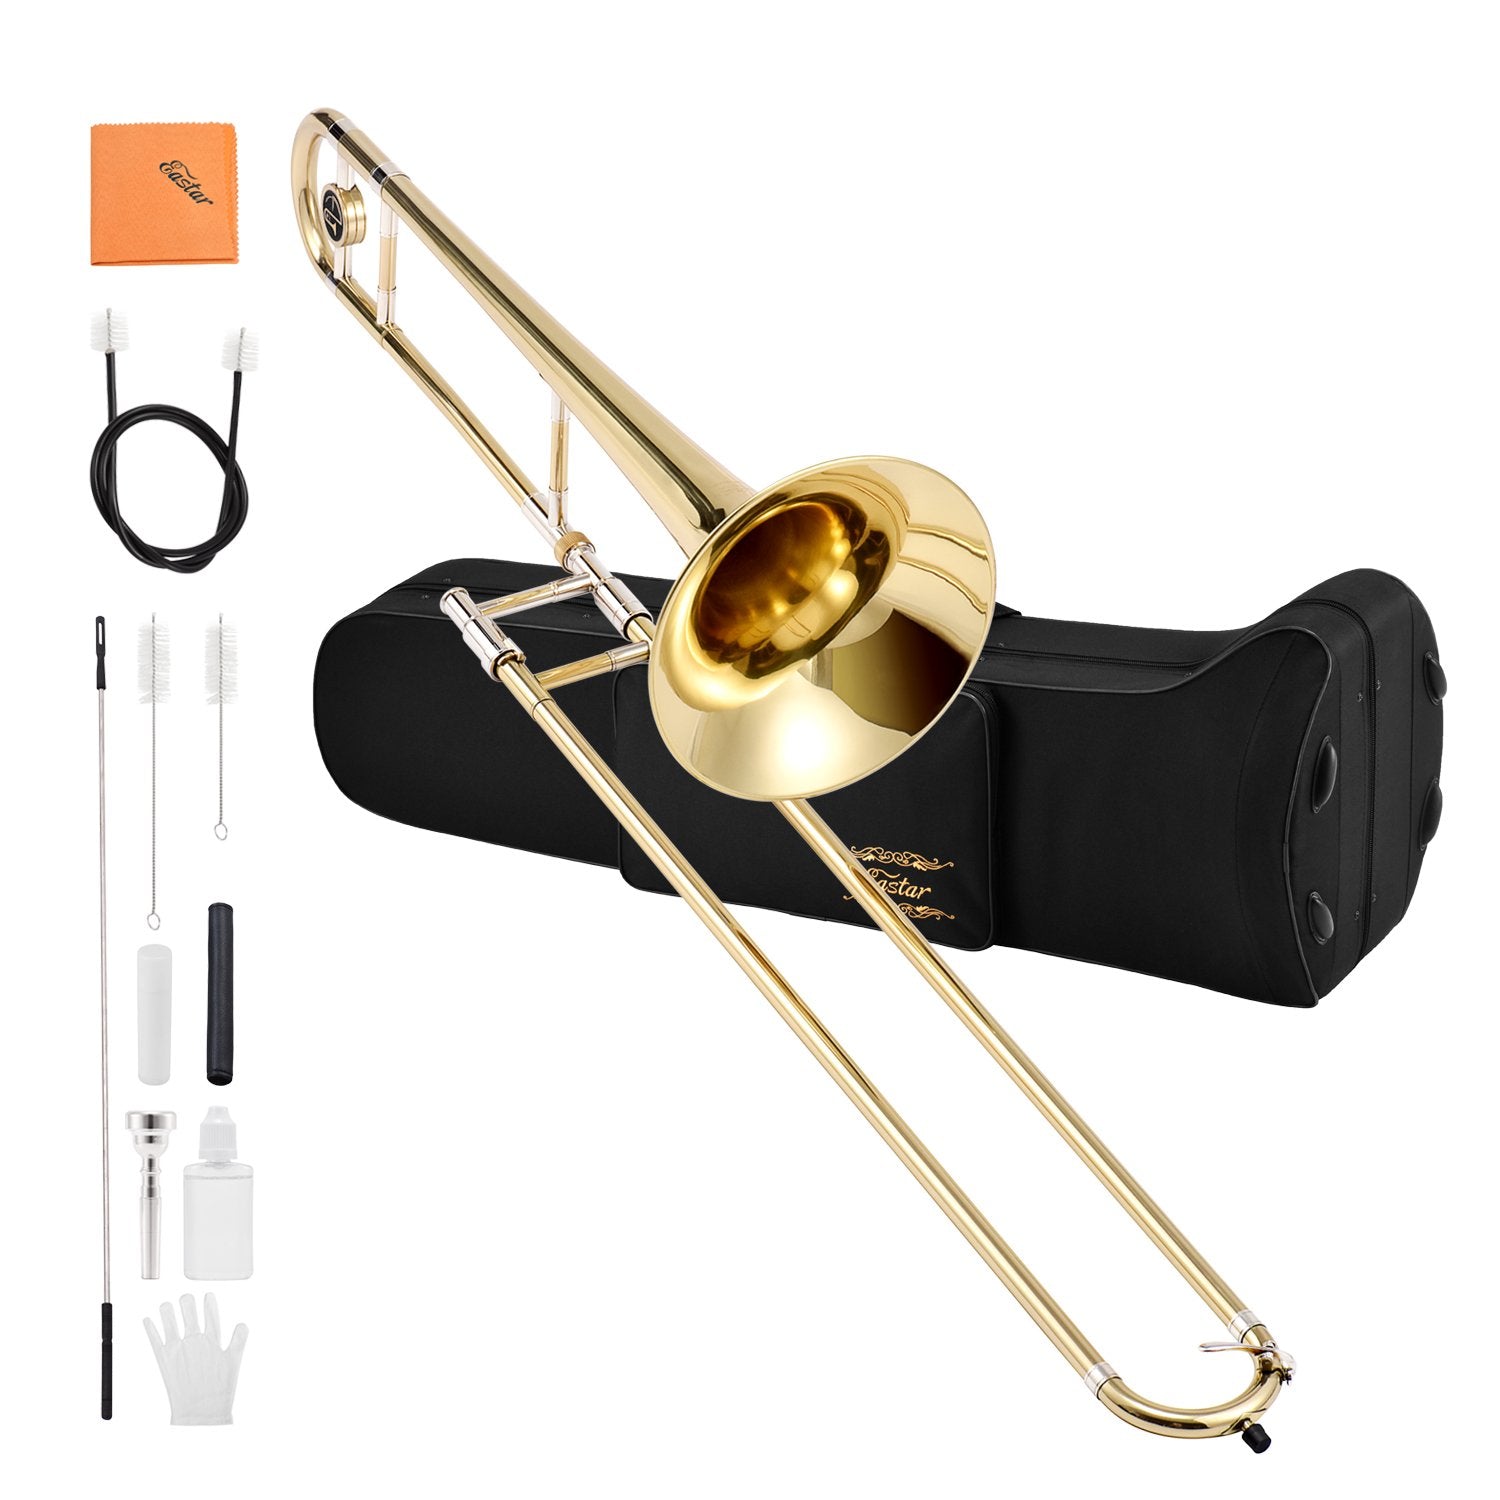 

Eastar ETB-330 Bb B-Flat Tenor Trombone for Beginners/Students with Carrying Bag Hard Case/Mouthpiece/Cleaning Kit/Gold Lacquer